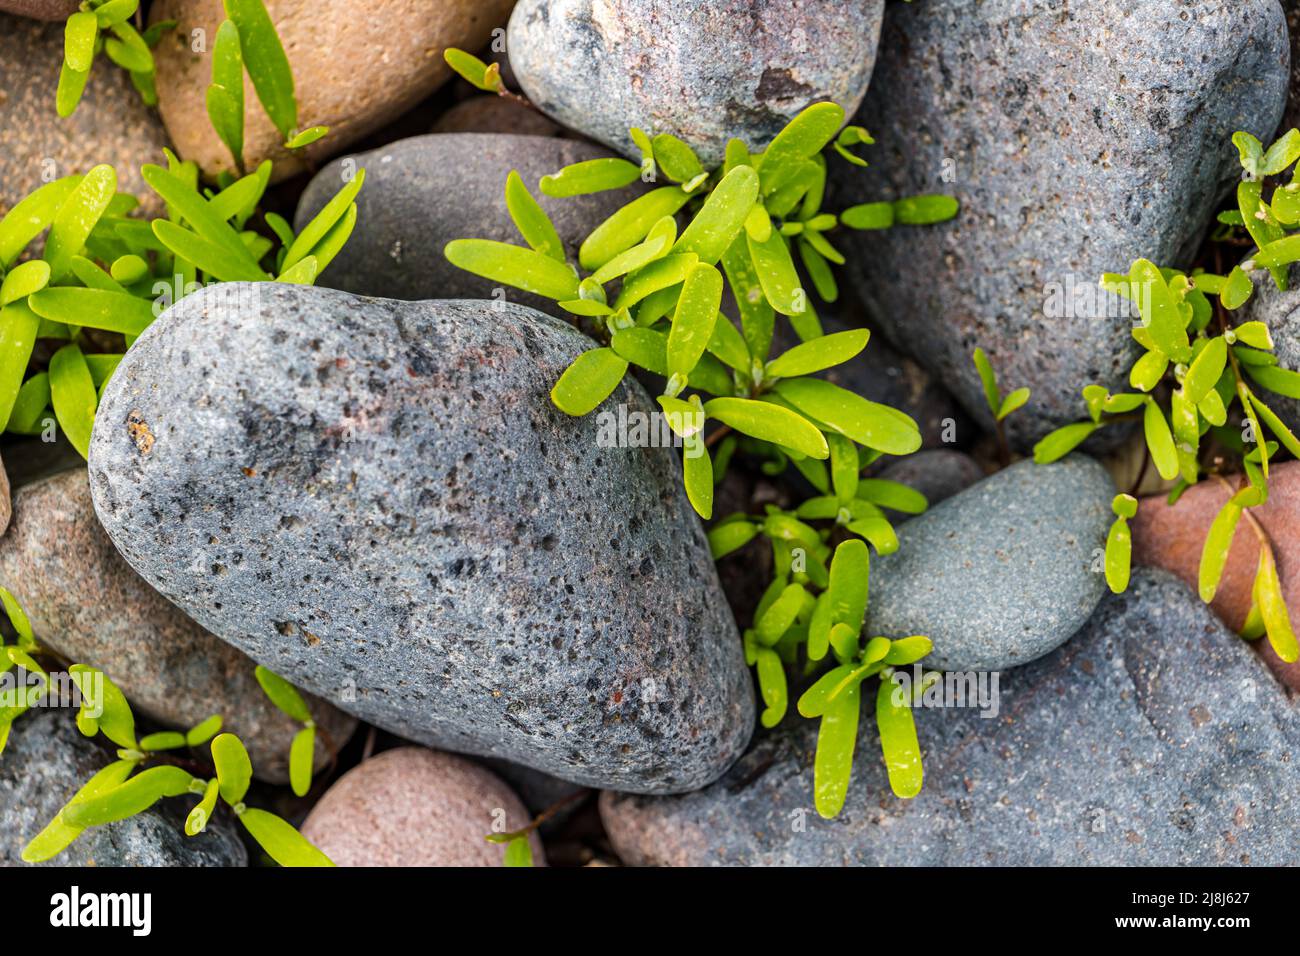 Close up of sea purslane (Sesuvium portulacastrum) growing in rocks which can be foraged and used in cooking, Scotland, UK Stock Photo